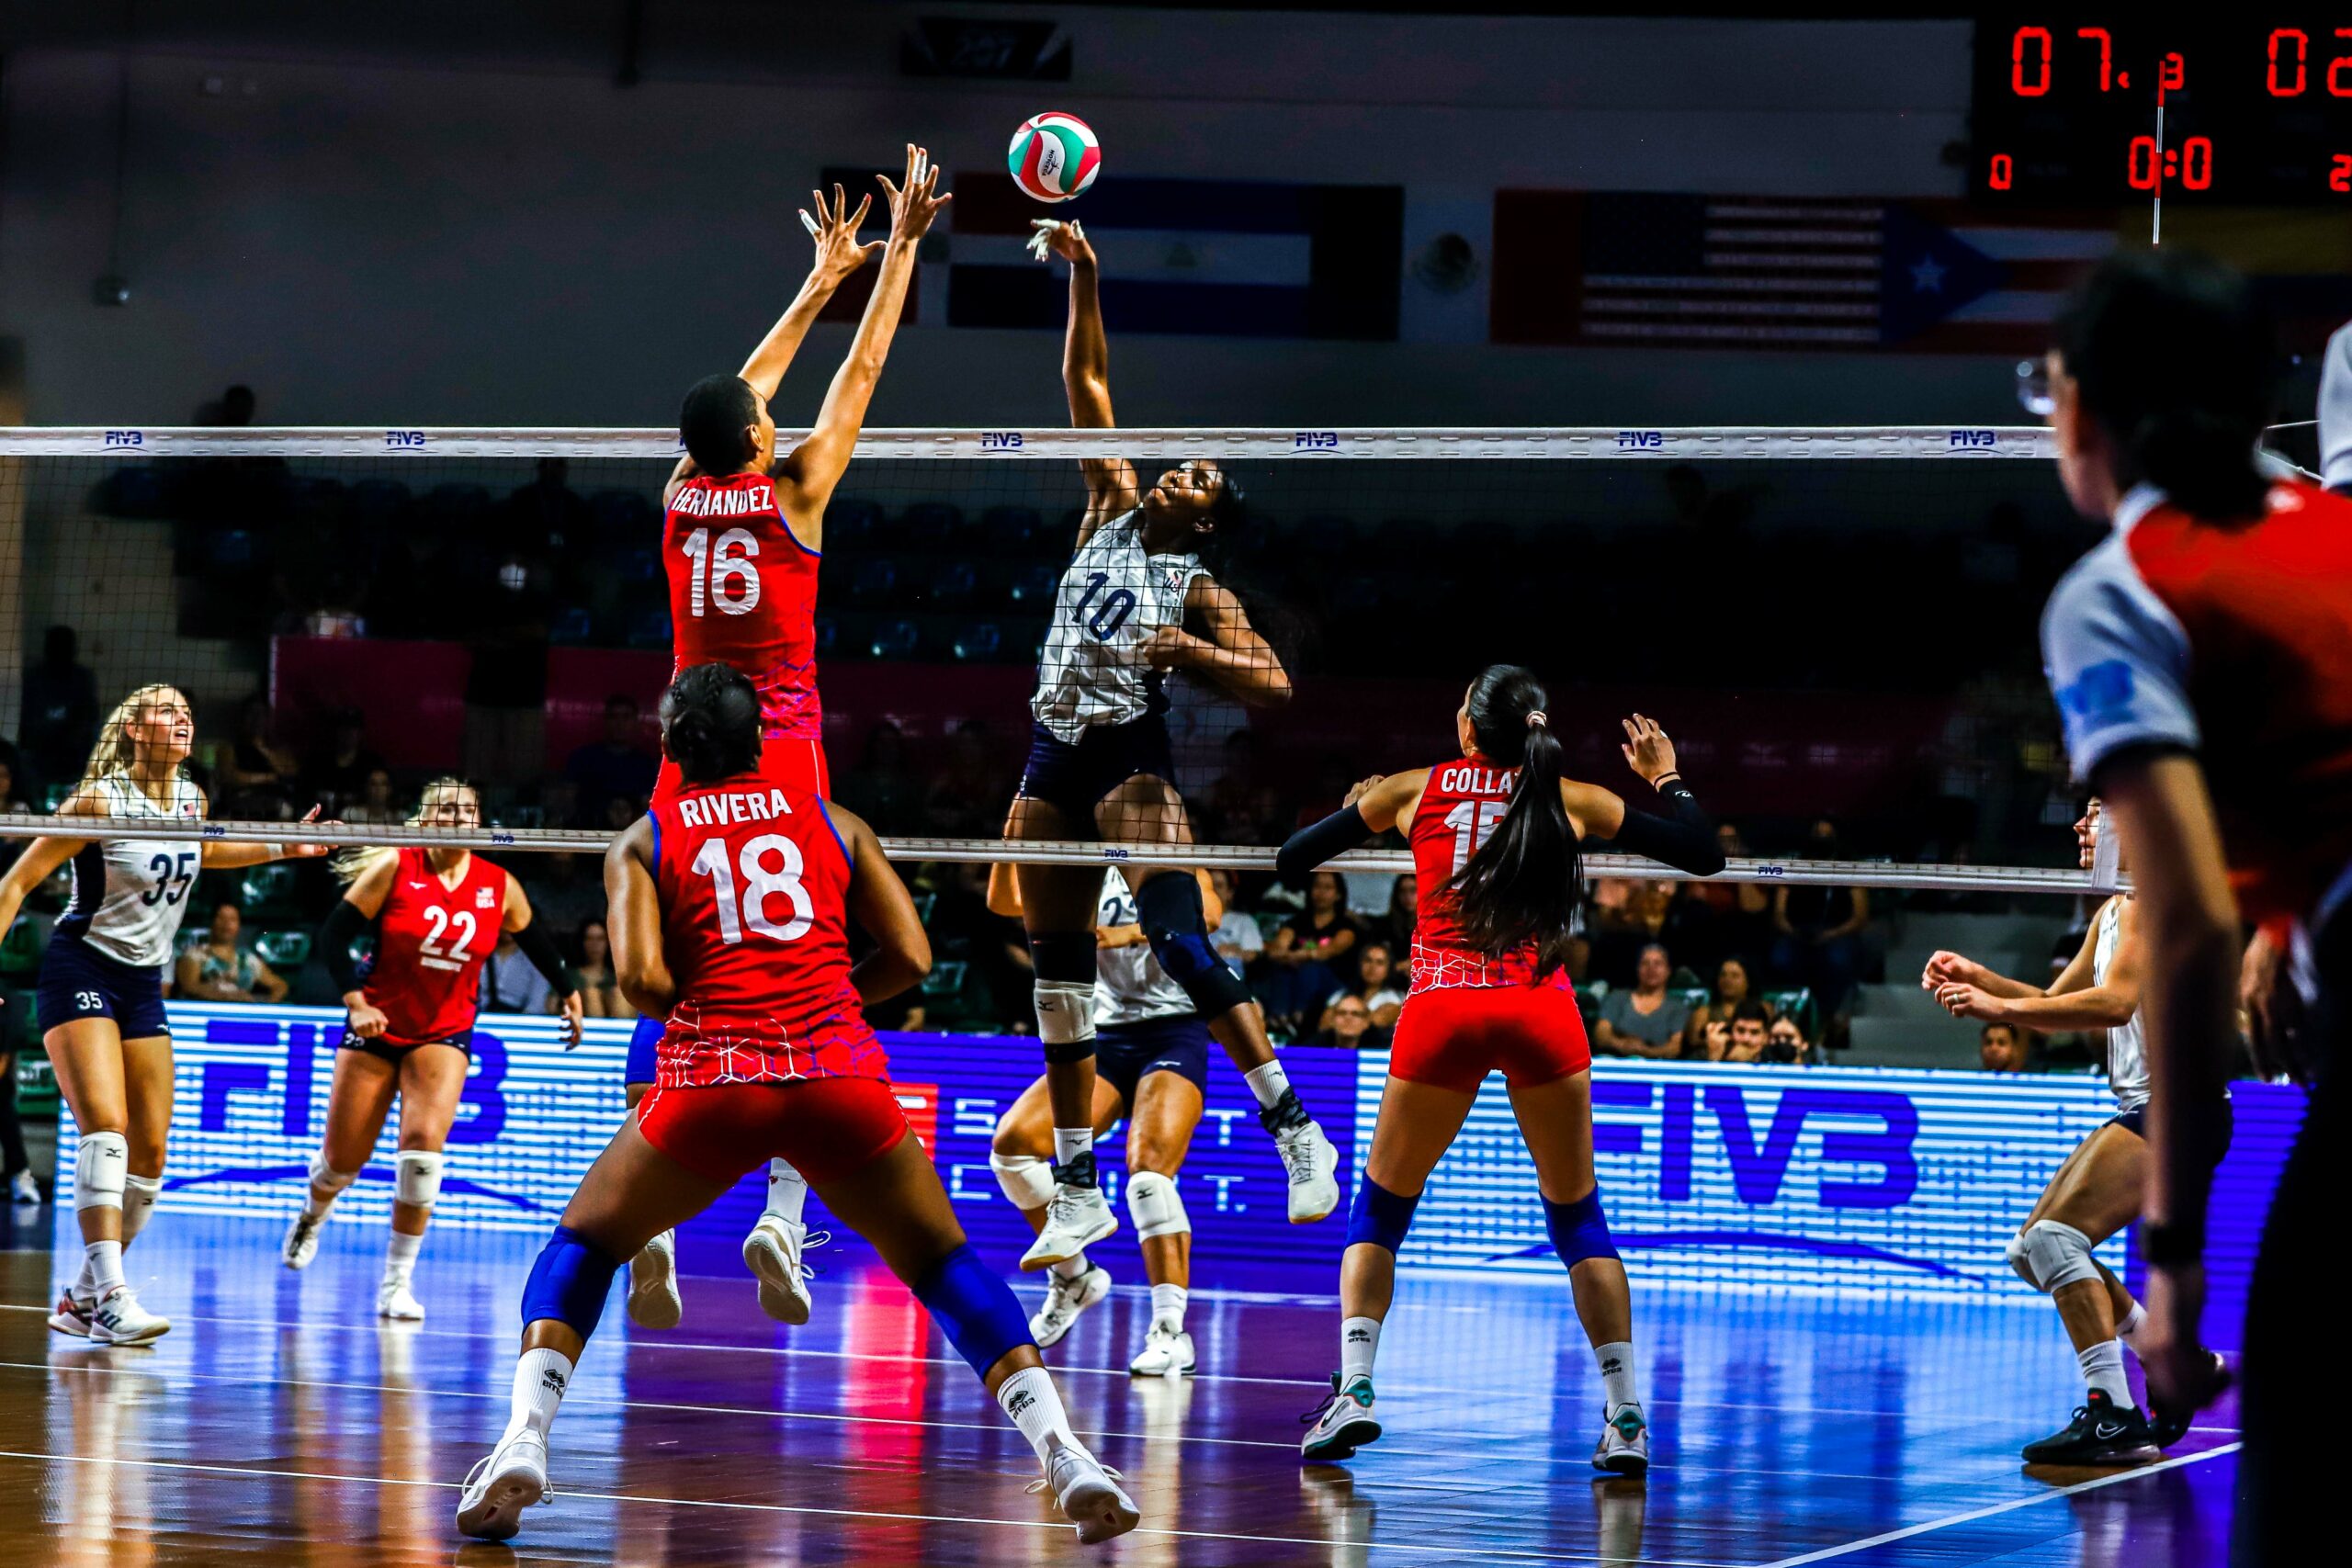 United States improves 2-0 defeating Puerto Rico